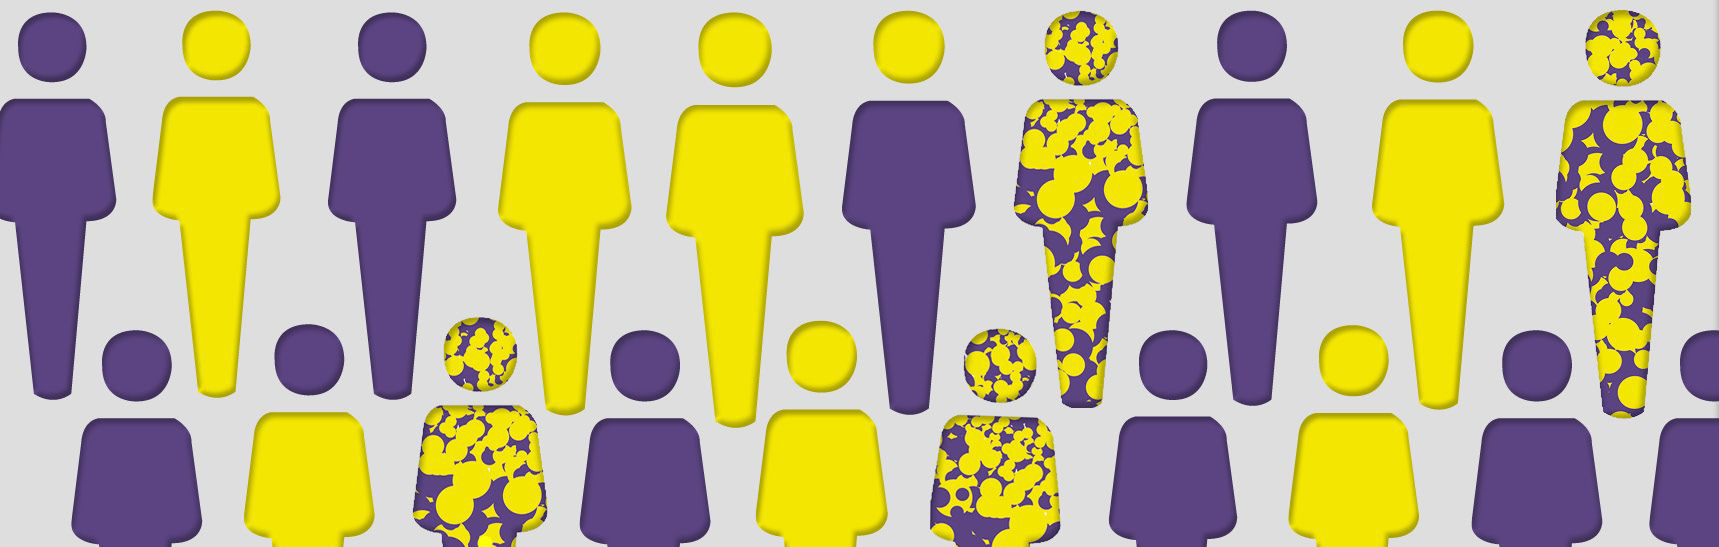 You see different kinds of people. They are yellow and purple. Then you see purple heads and yellow bodies and variegated.